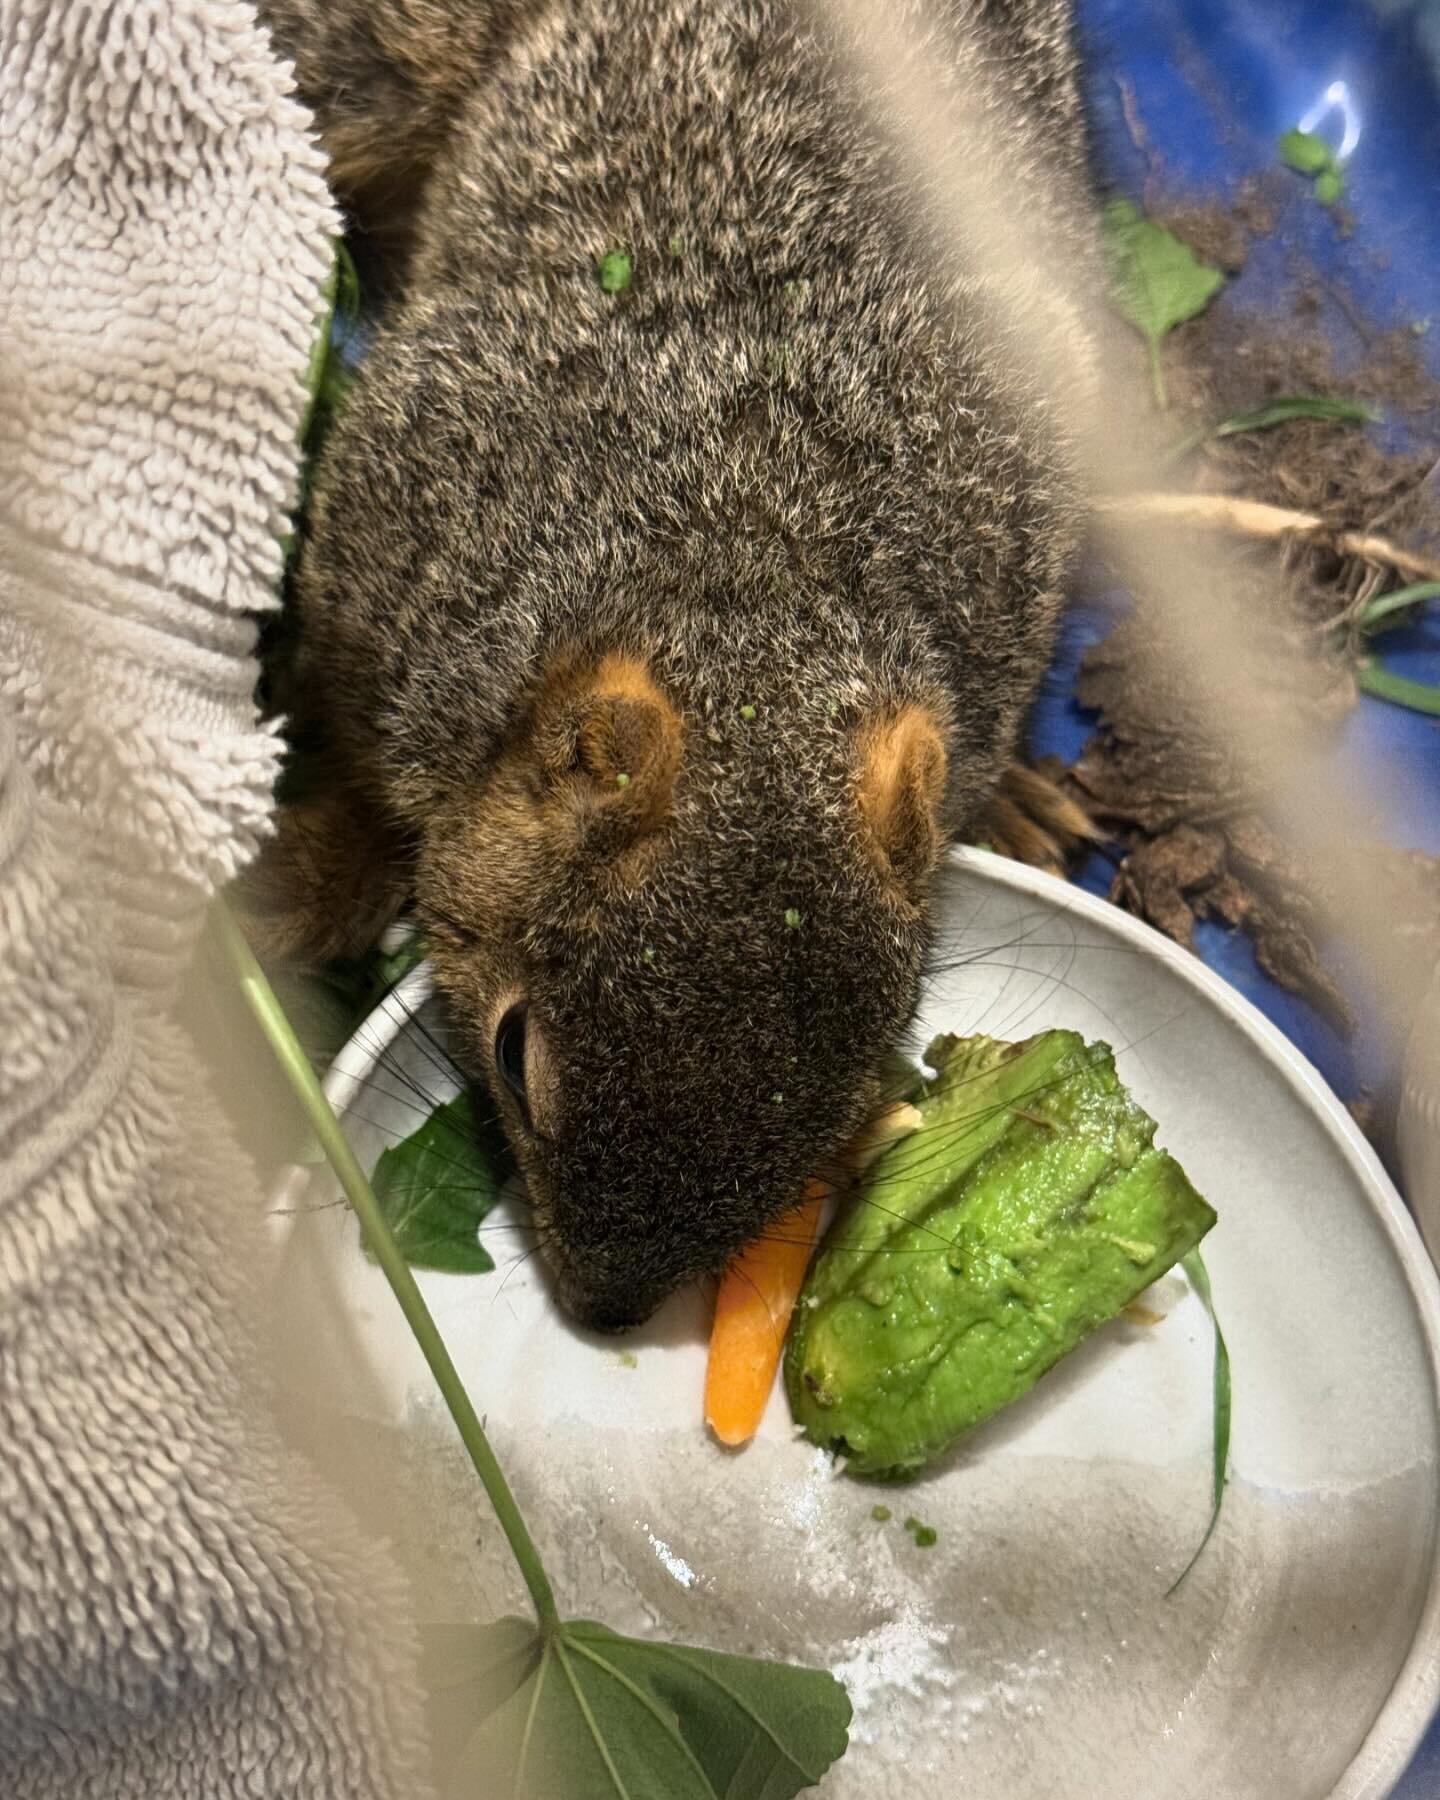 Today one of our board members found an injured squirrel while on a walk. It was unable to walk or climb. She scooped it up, and called a local squirrel rehabber @cleoscrittercare 

We named the little girl &ldquo;Brighton&rdquo; and brought her prom